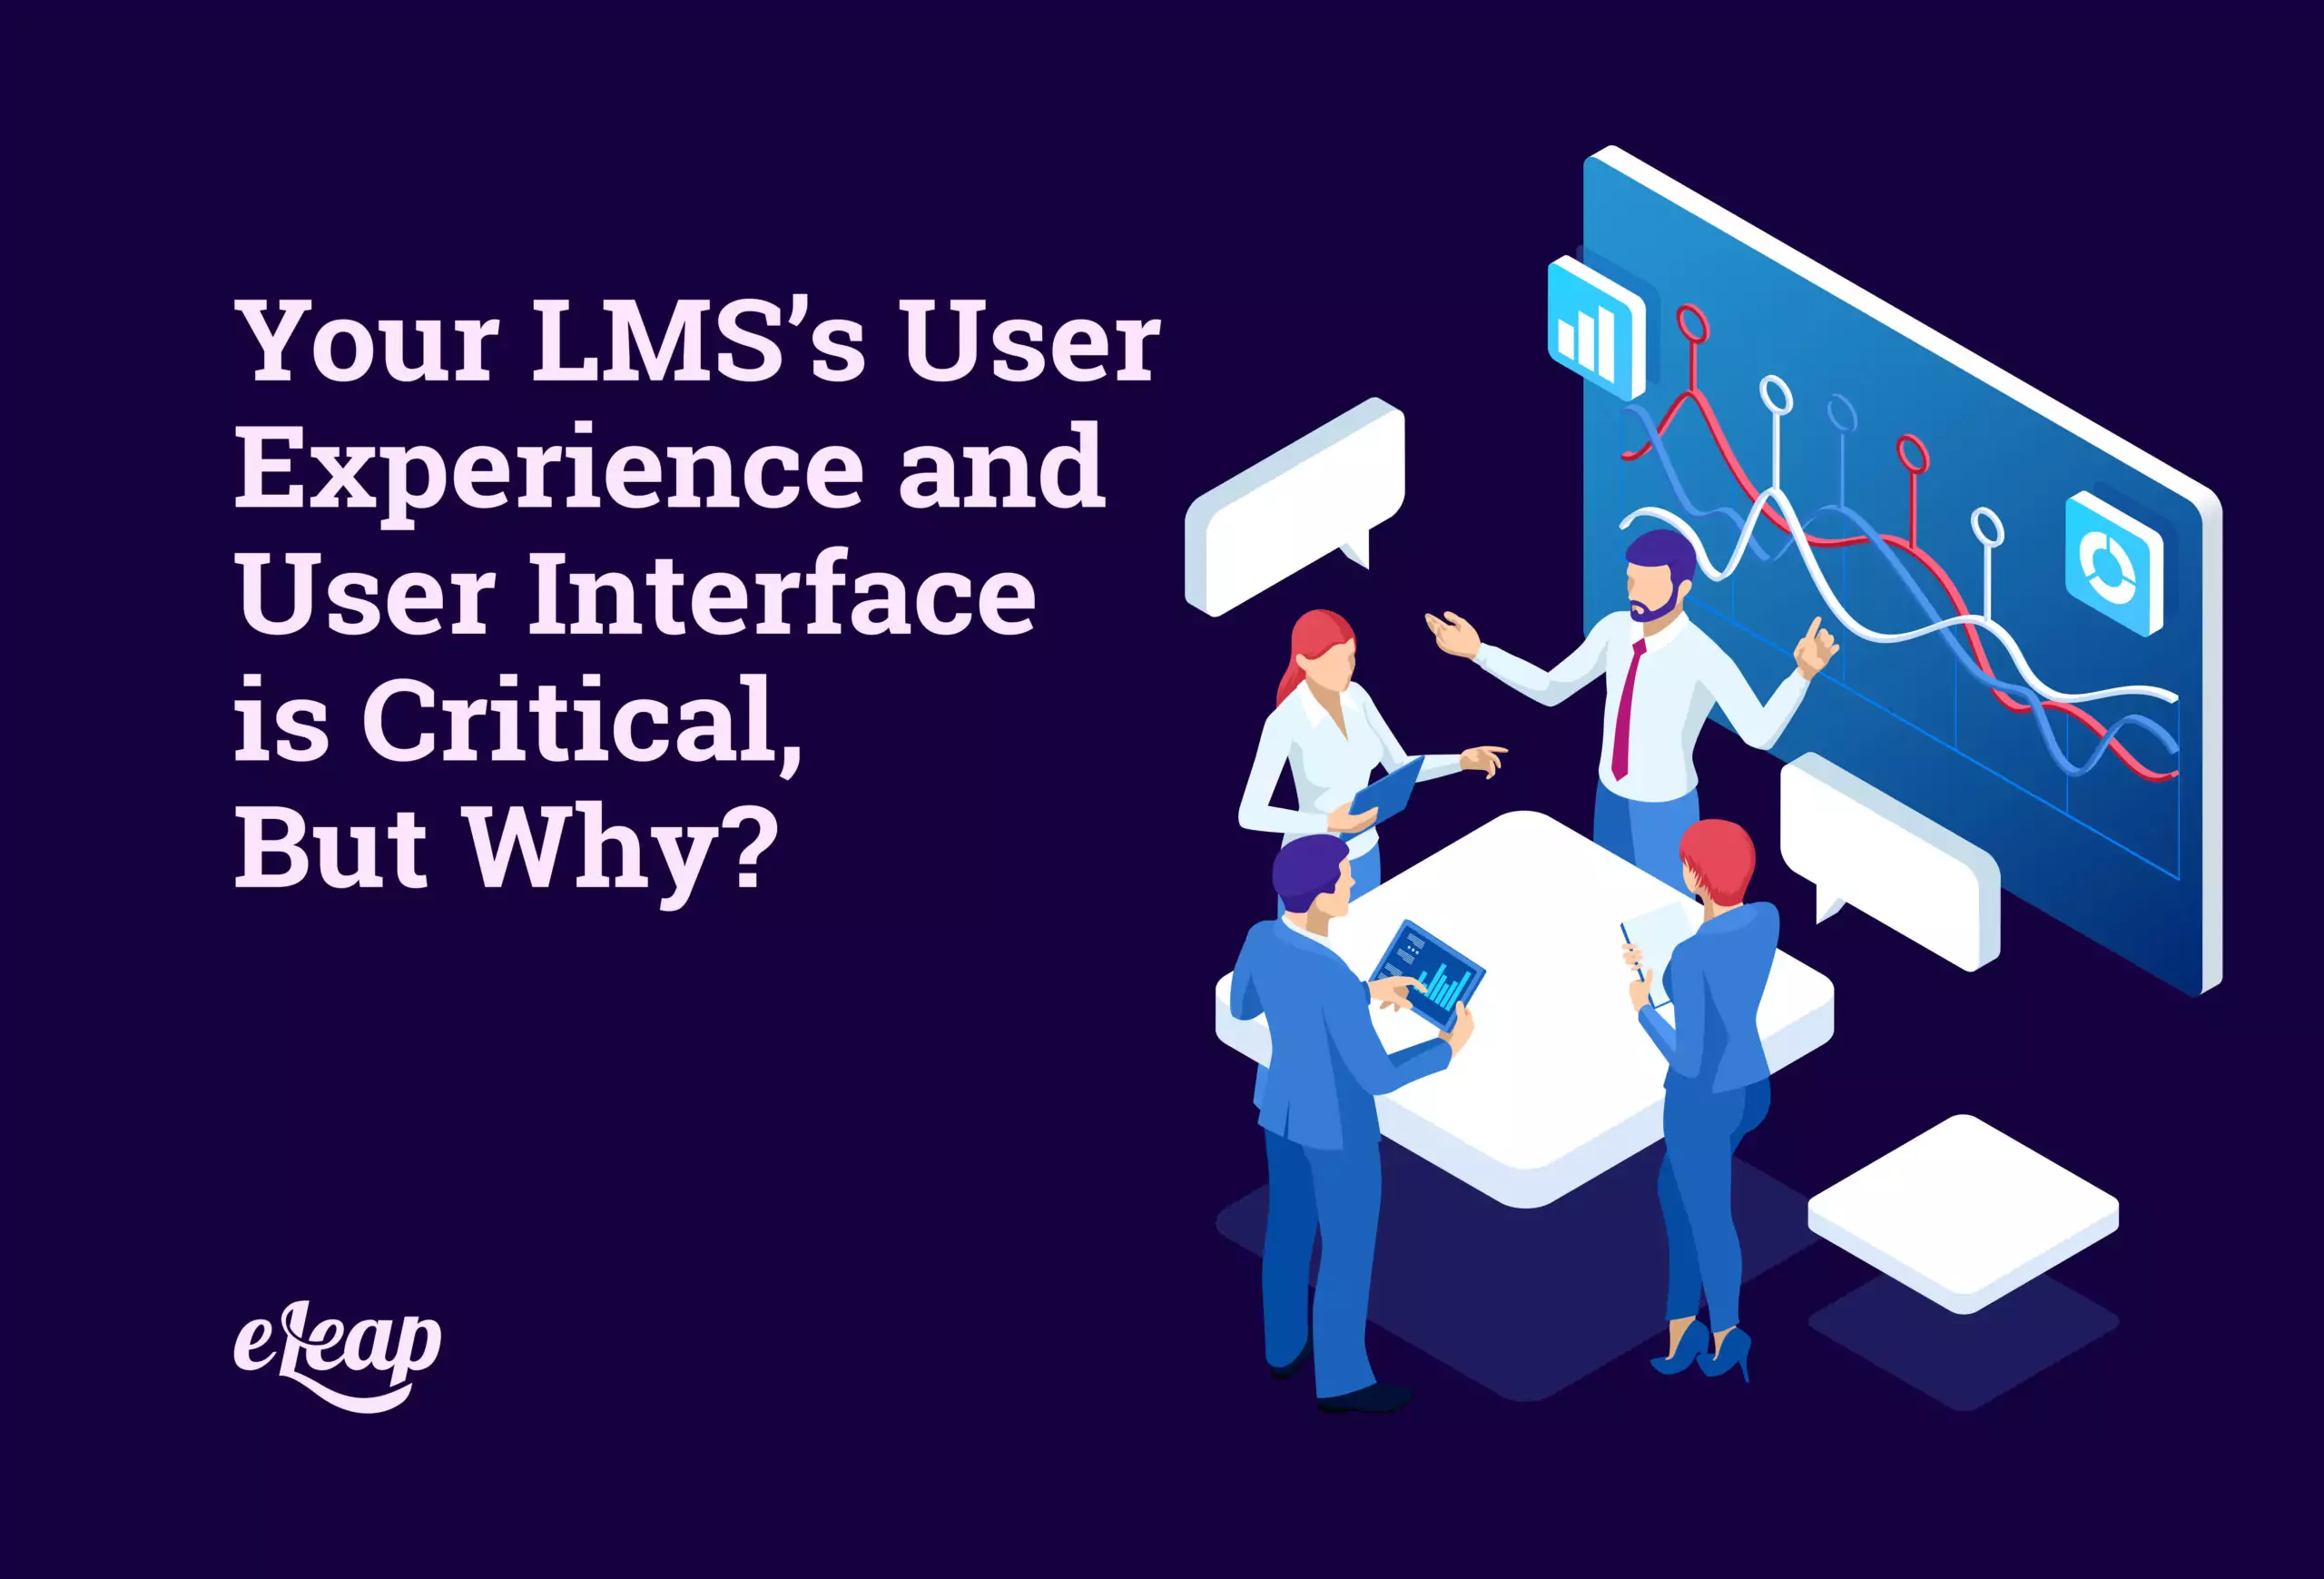 Your LMS’s User Experience and User Interface is Critical, But Why?